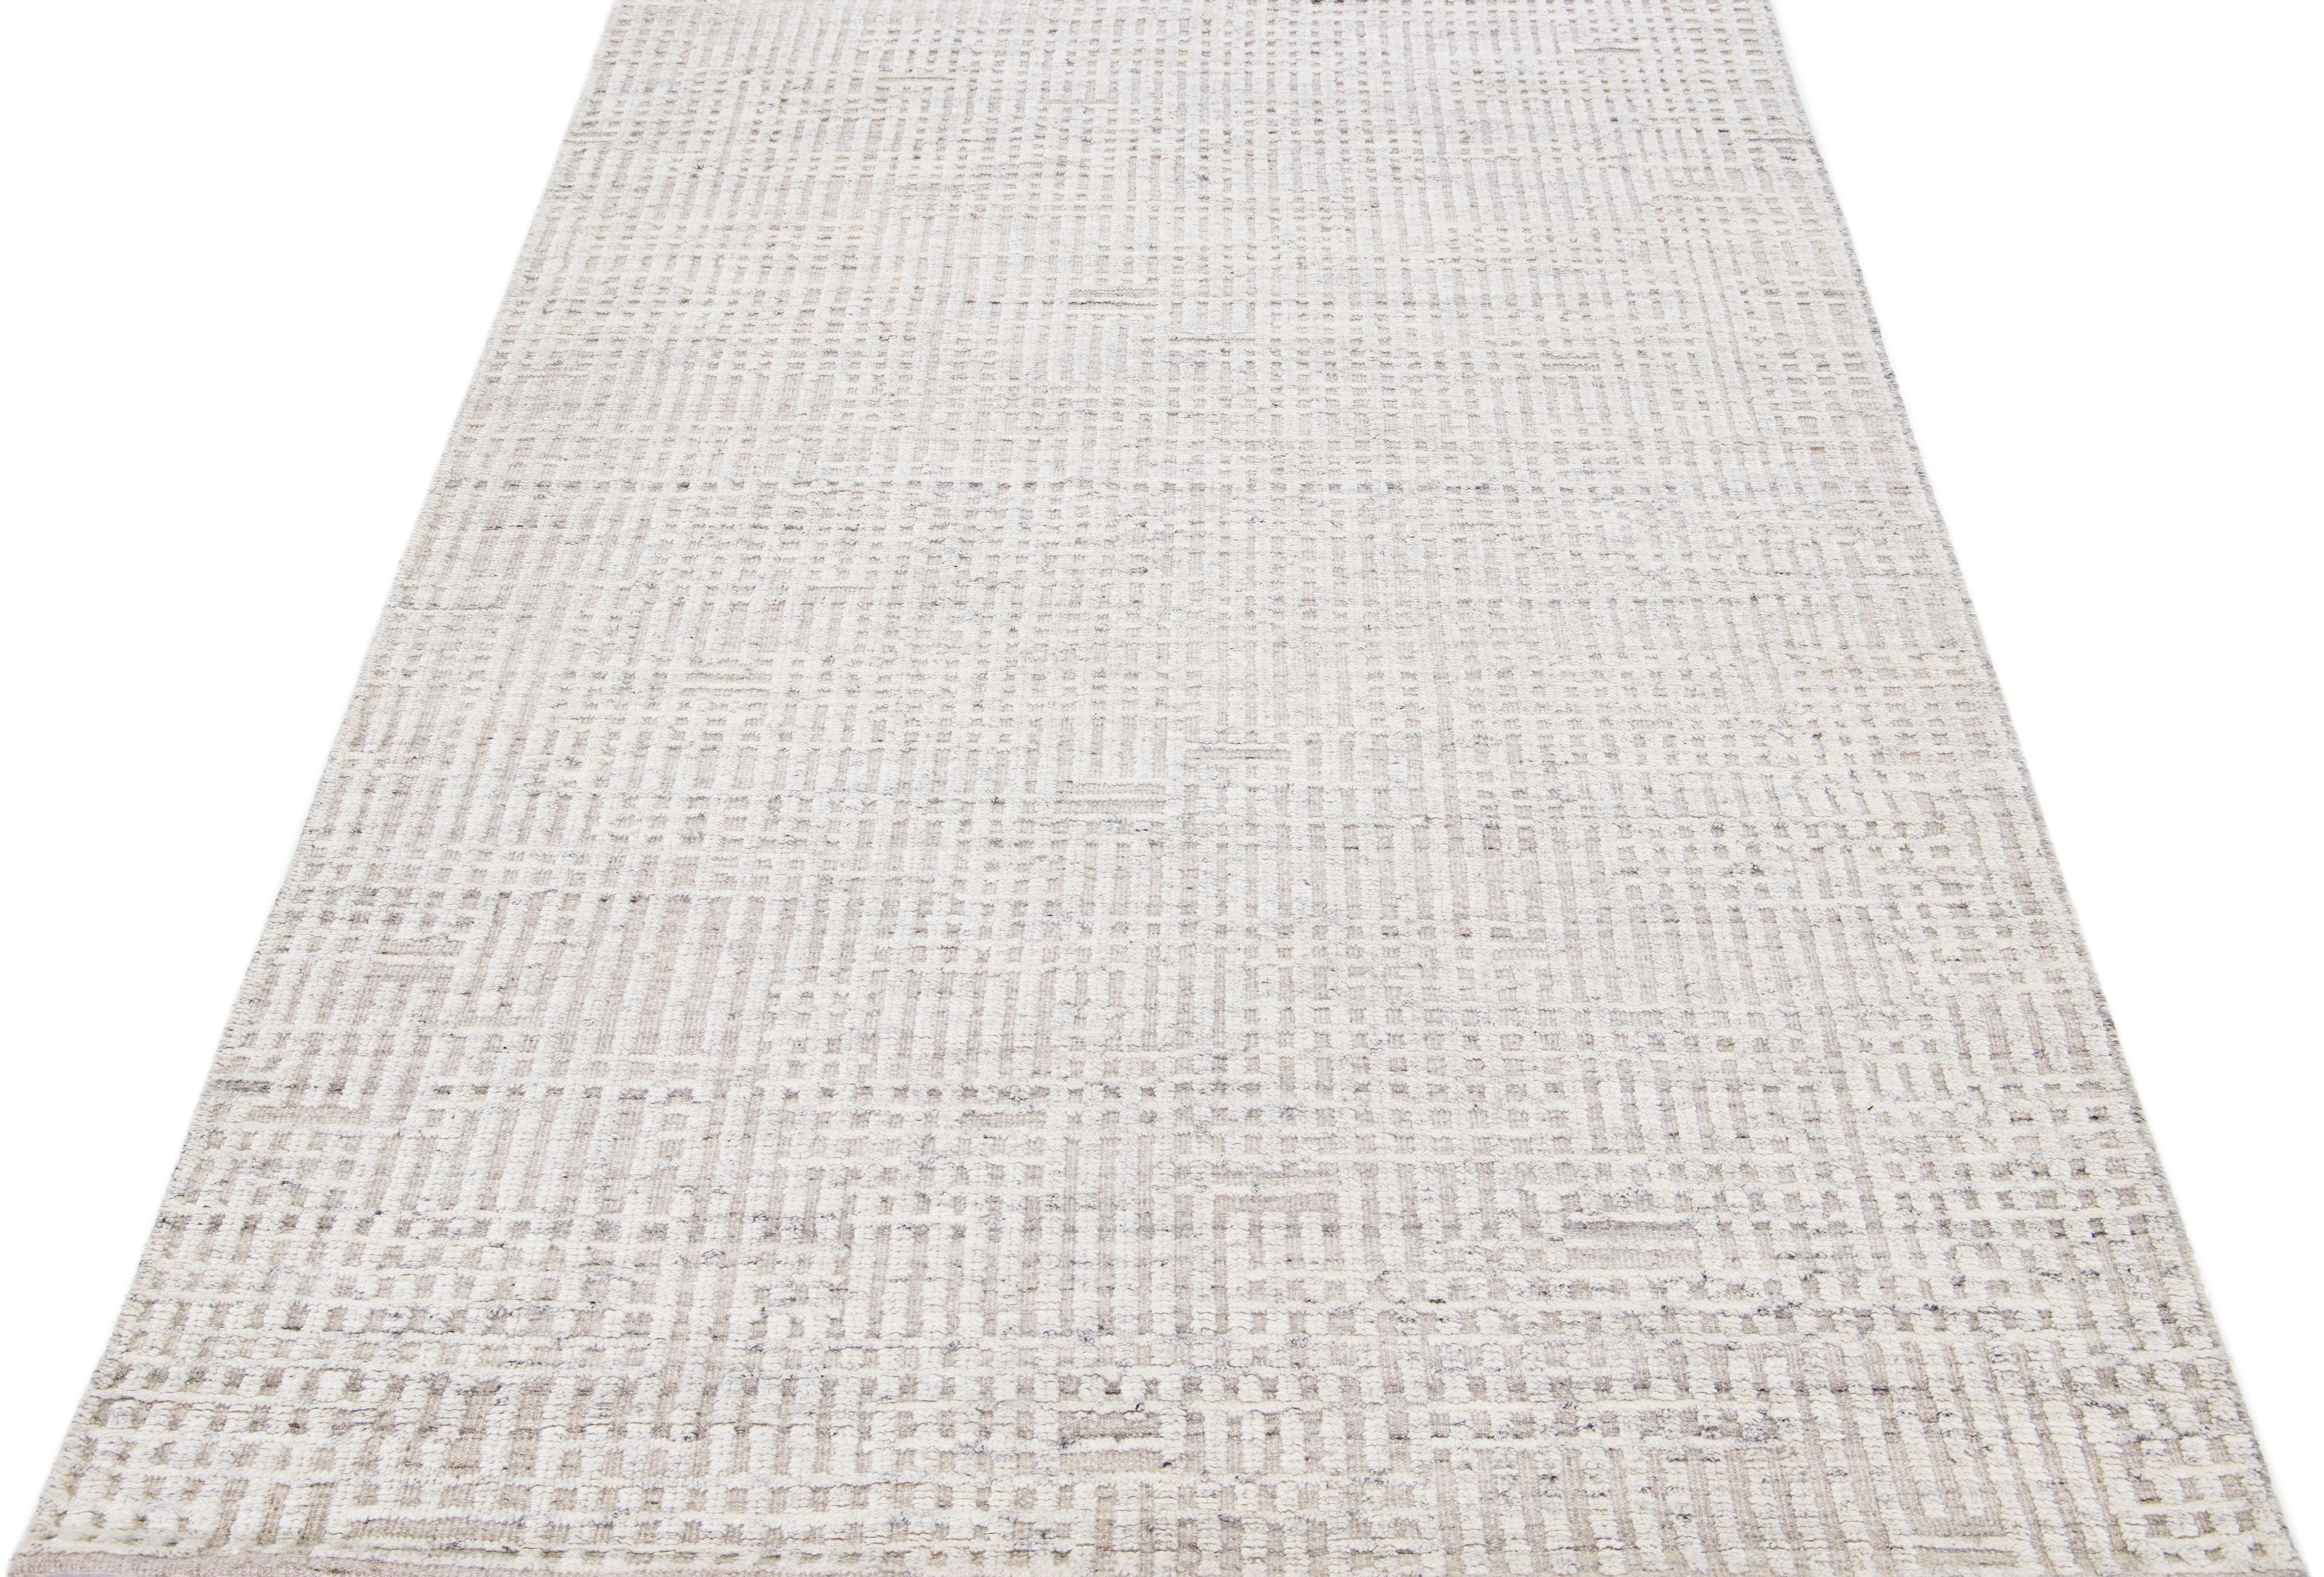 Beautiful modern Moroccan-style hand-knotted wool rug with a beige color field. This rug is part of our Apadana's Safi Collection and features a minimalist design in white and gray.

This rug measures: 5'2